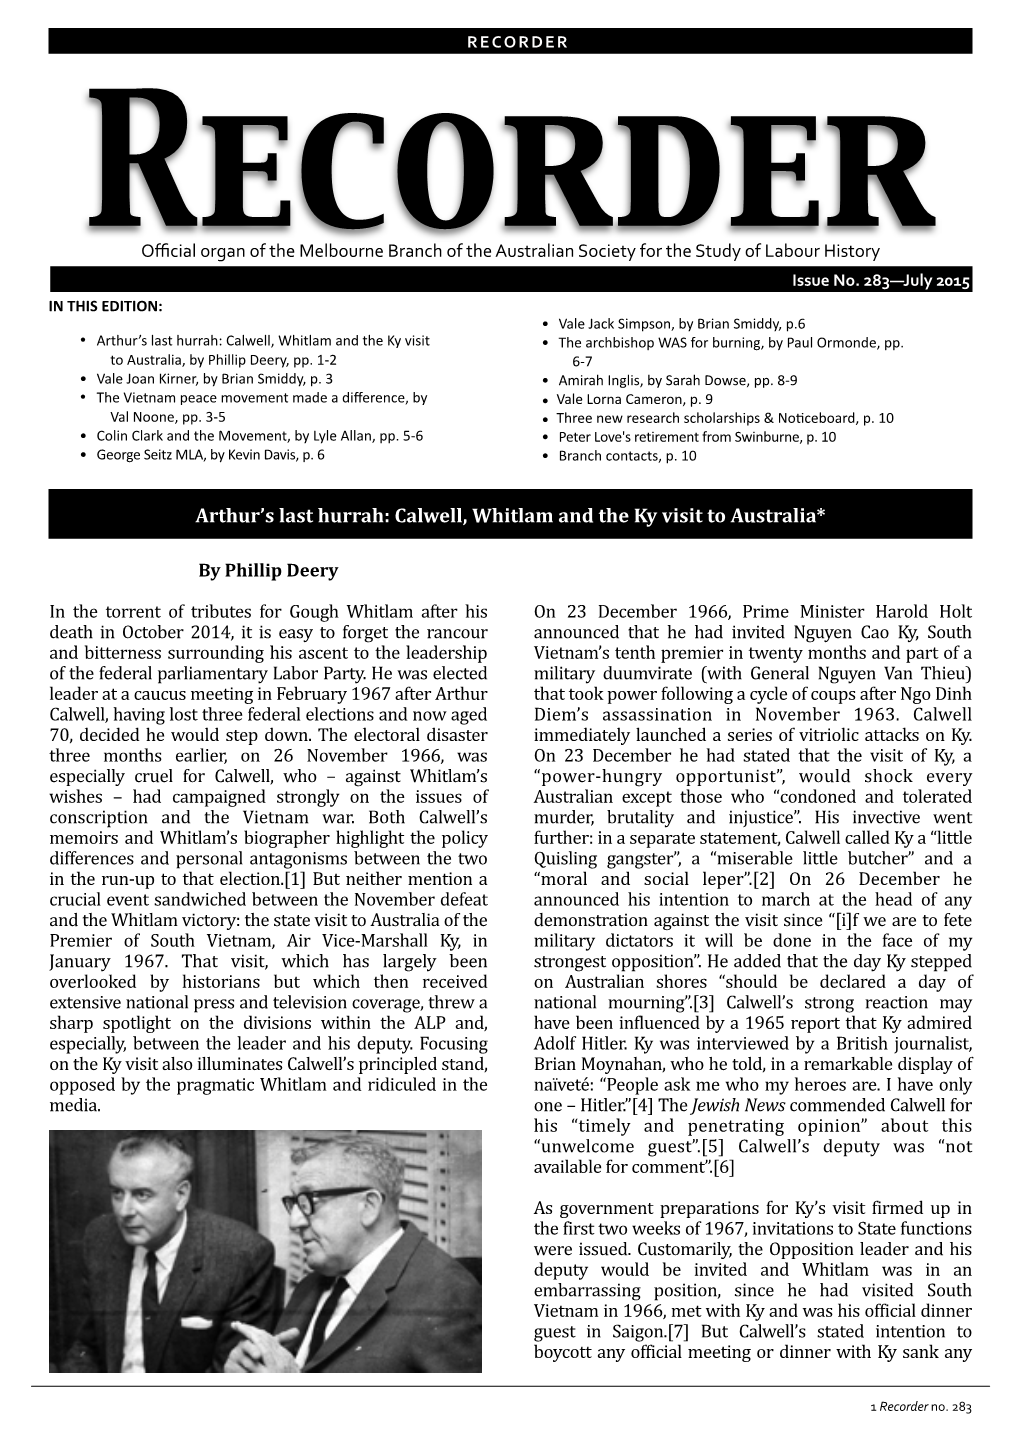 Recorder 283.Pages